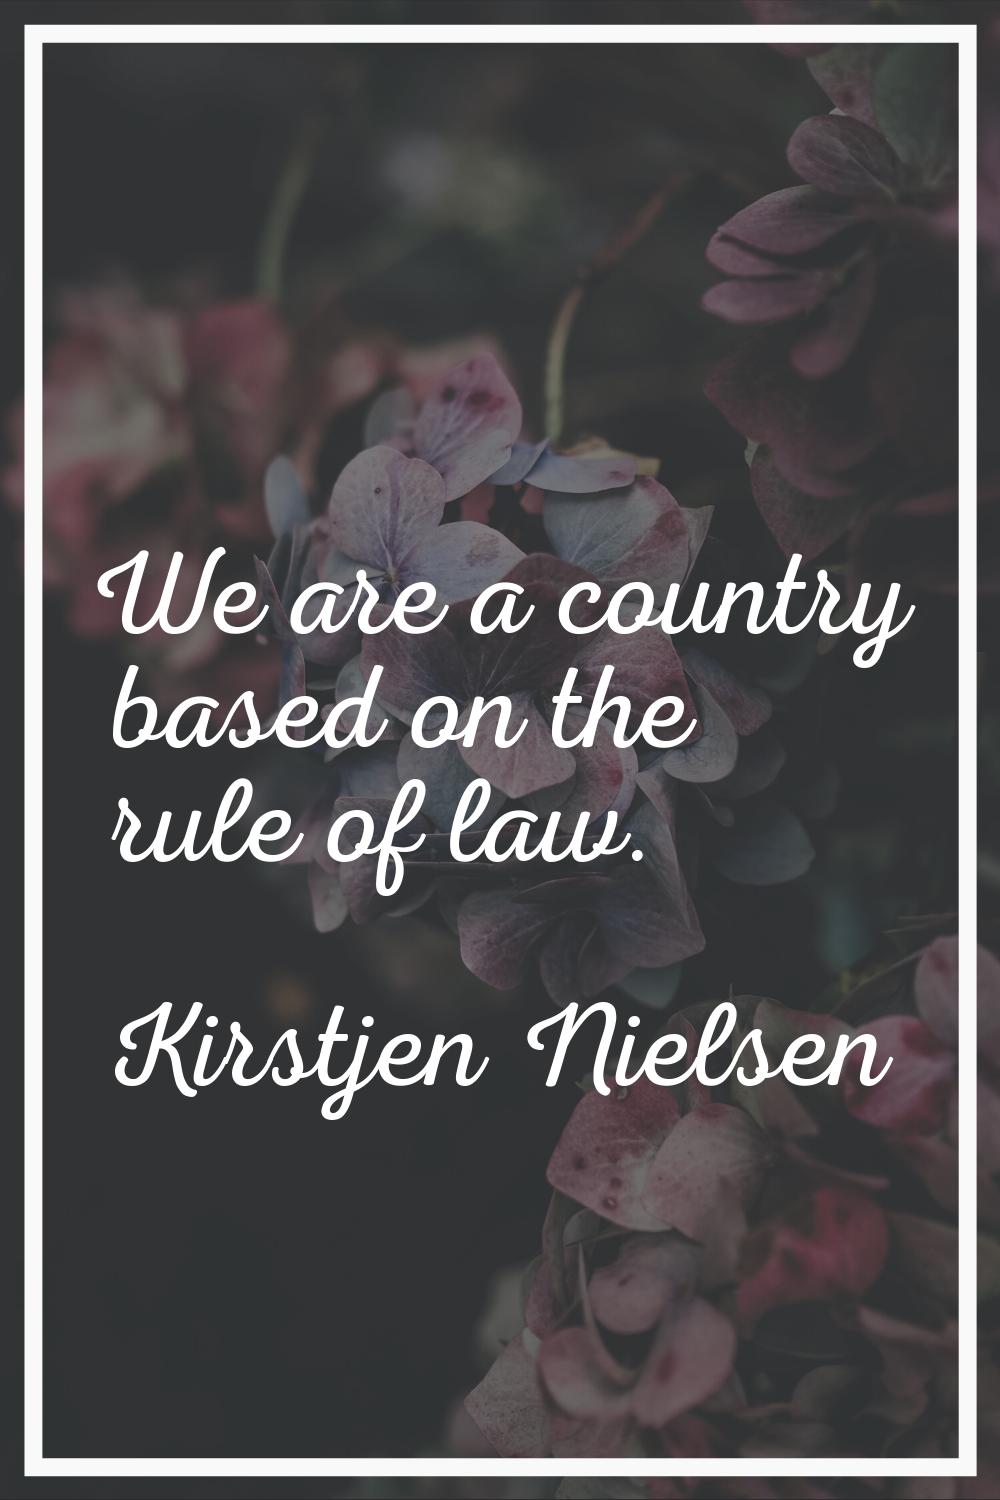 We are a country based on the rule of law.